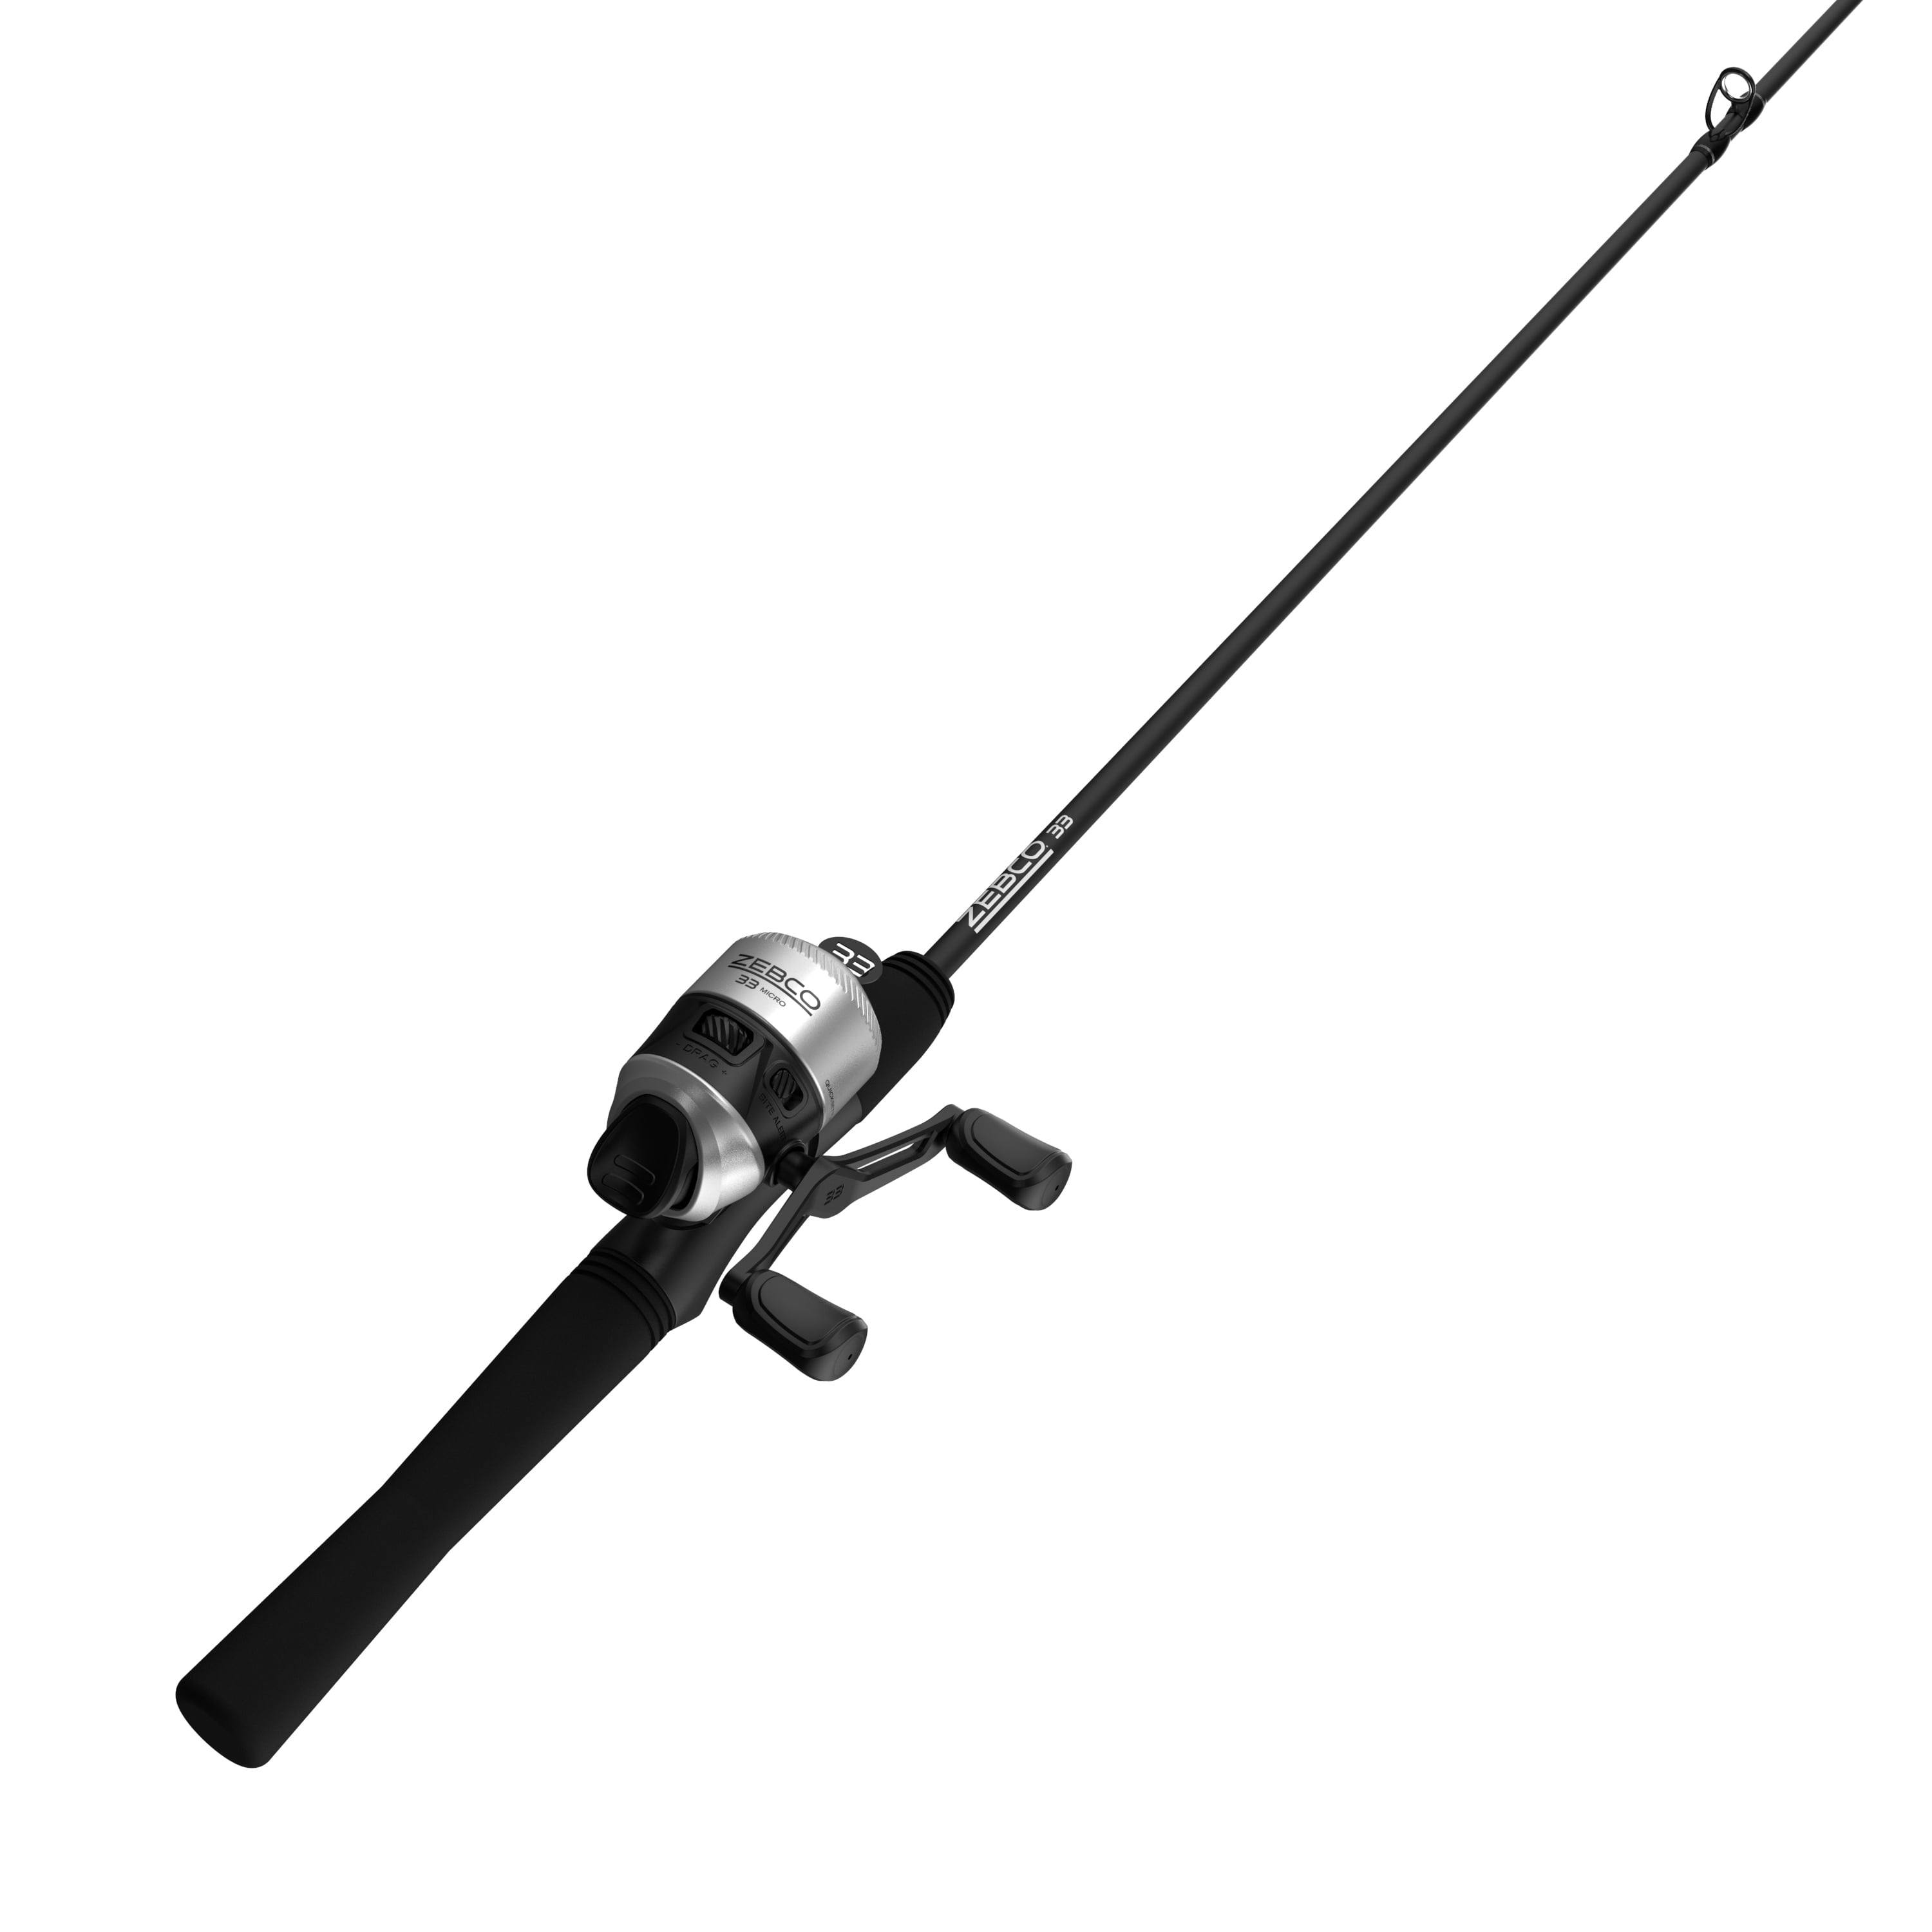 5.5-Foot Durable F Details about   Zebco 33 Spincast Reel and 2-Piece Fishing Rod Package Combo 